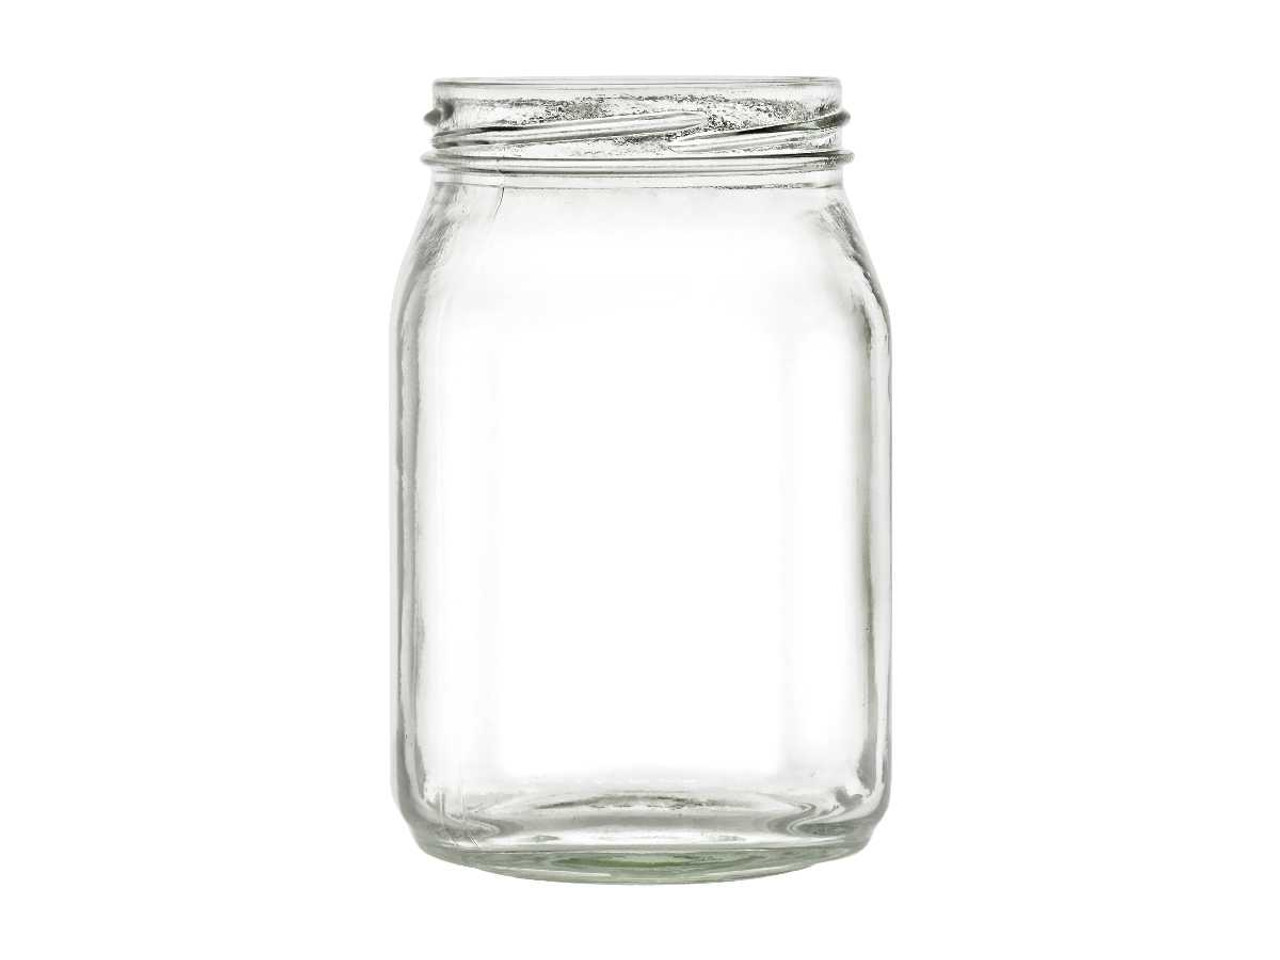 https://cdn11.bigcommerce.com/s-1ybtx/images/stencil/1280x1280/products/1288/6724/16-oz-Victorian-Square-Glass-Jar-with-Lid-Made-in-Europe_4306__86546.1699989125.jpg?c=2?imbypass=on